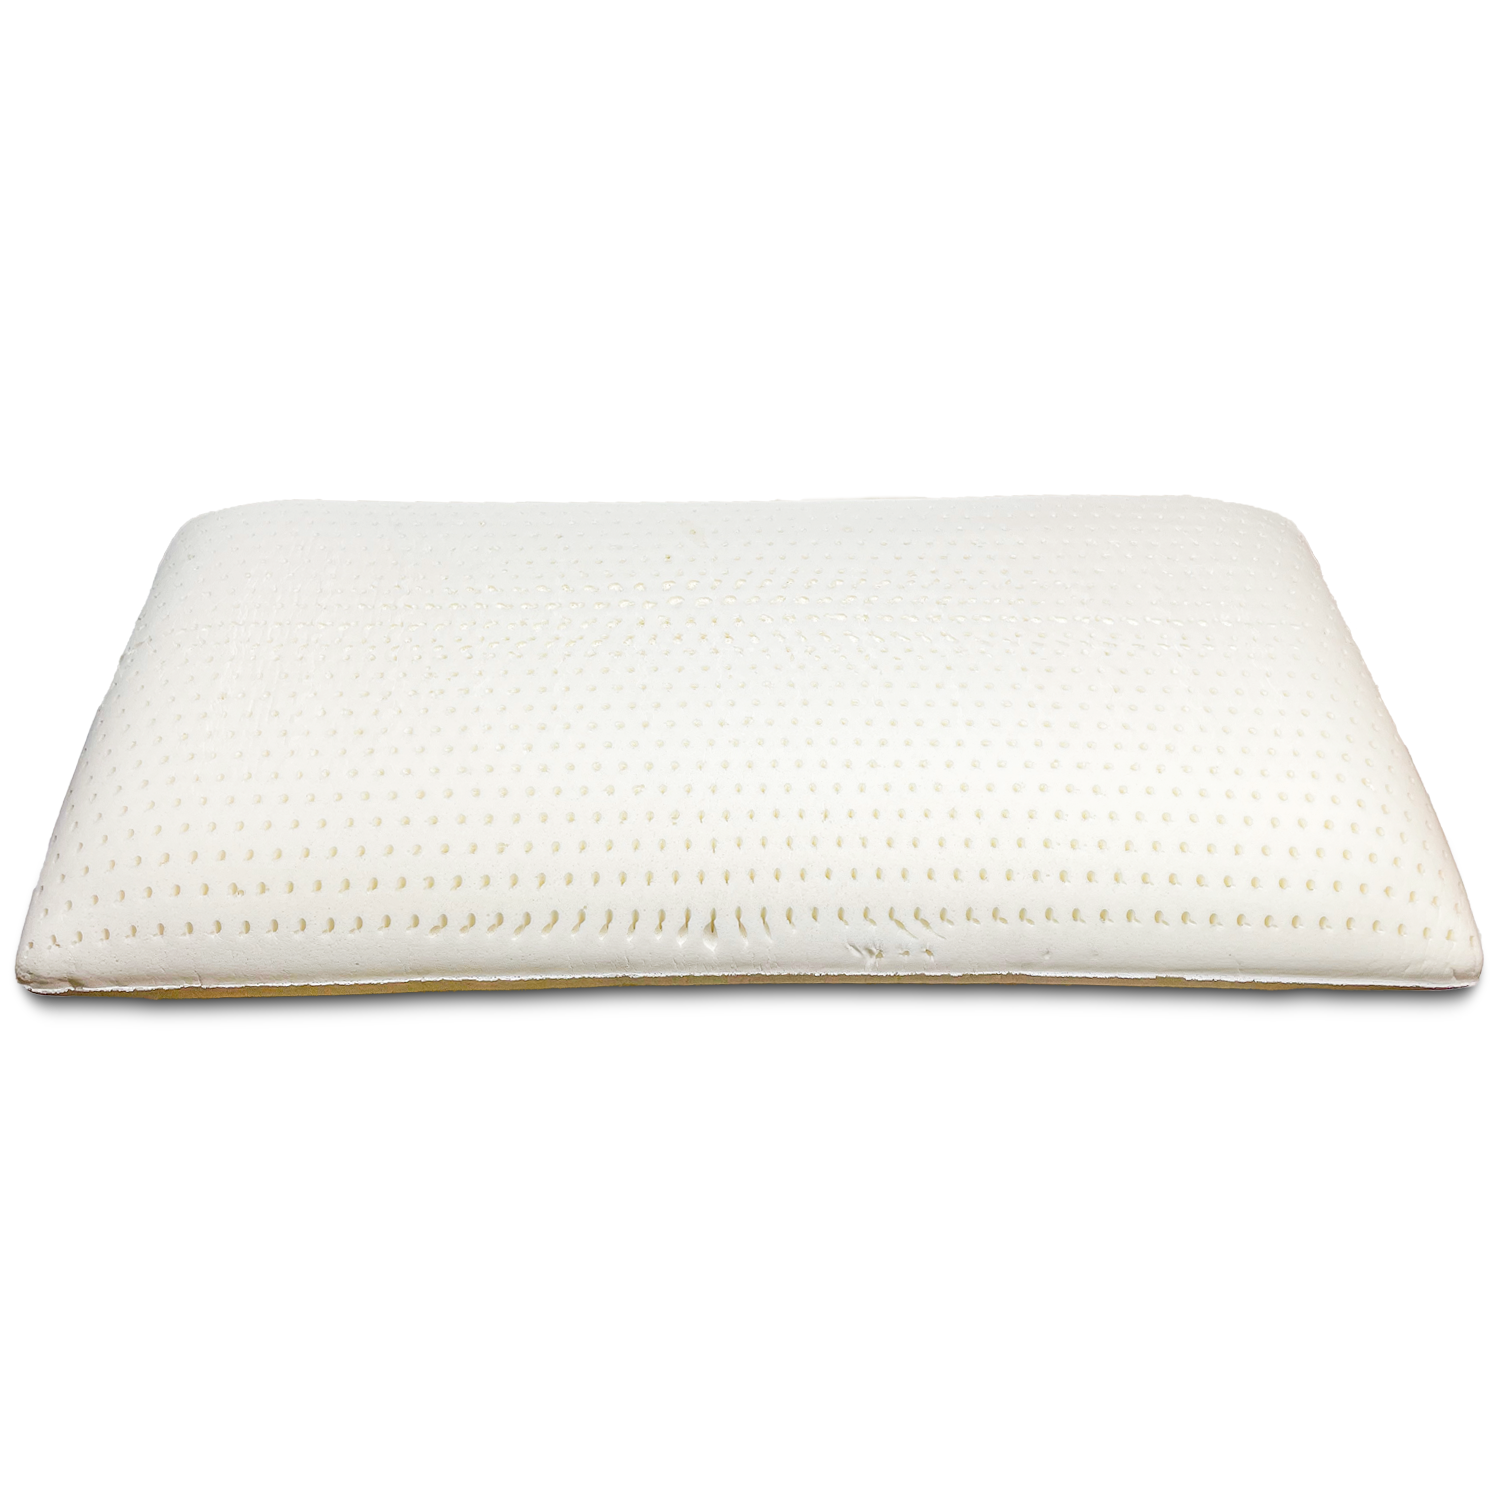 DS 100% Natural Talalay Pillow with Zippered Organic Cotton Cover - Organic Textiles